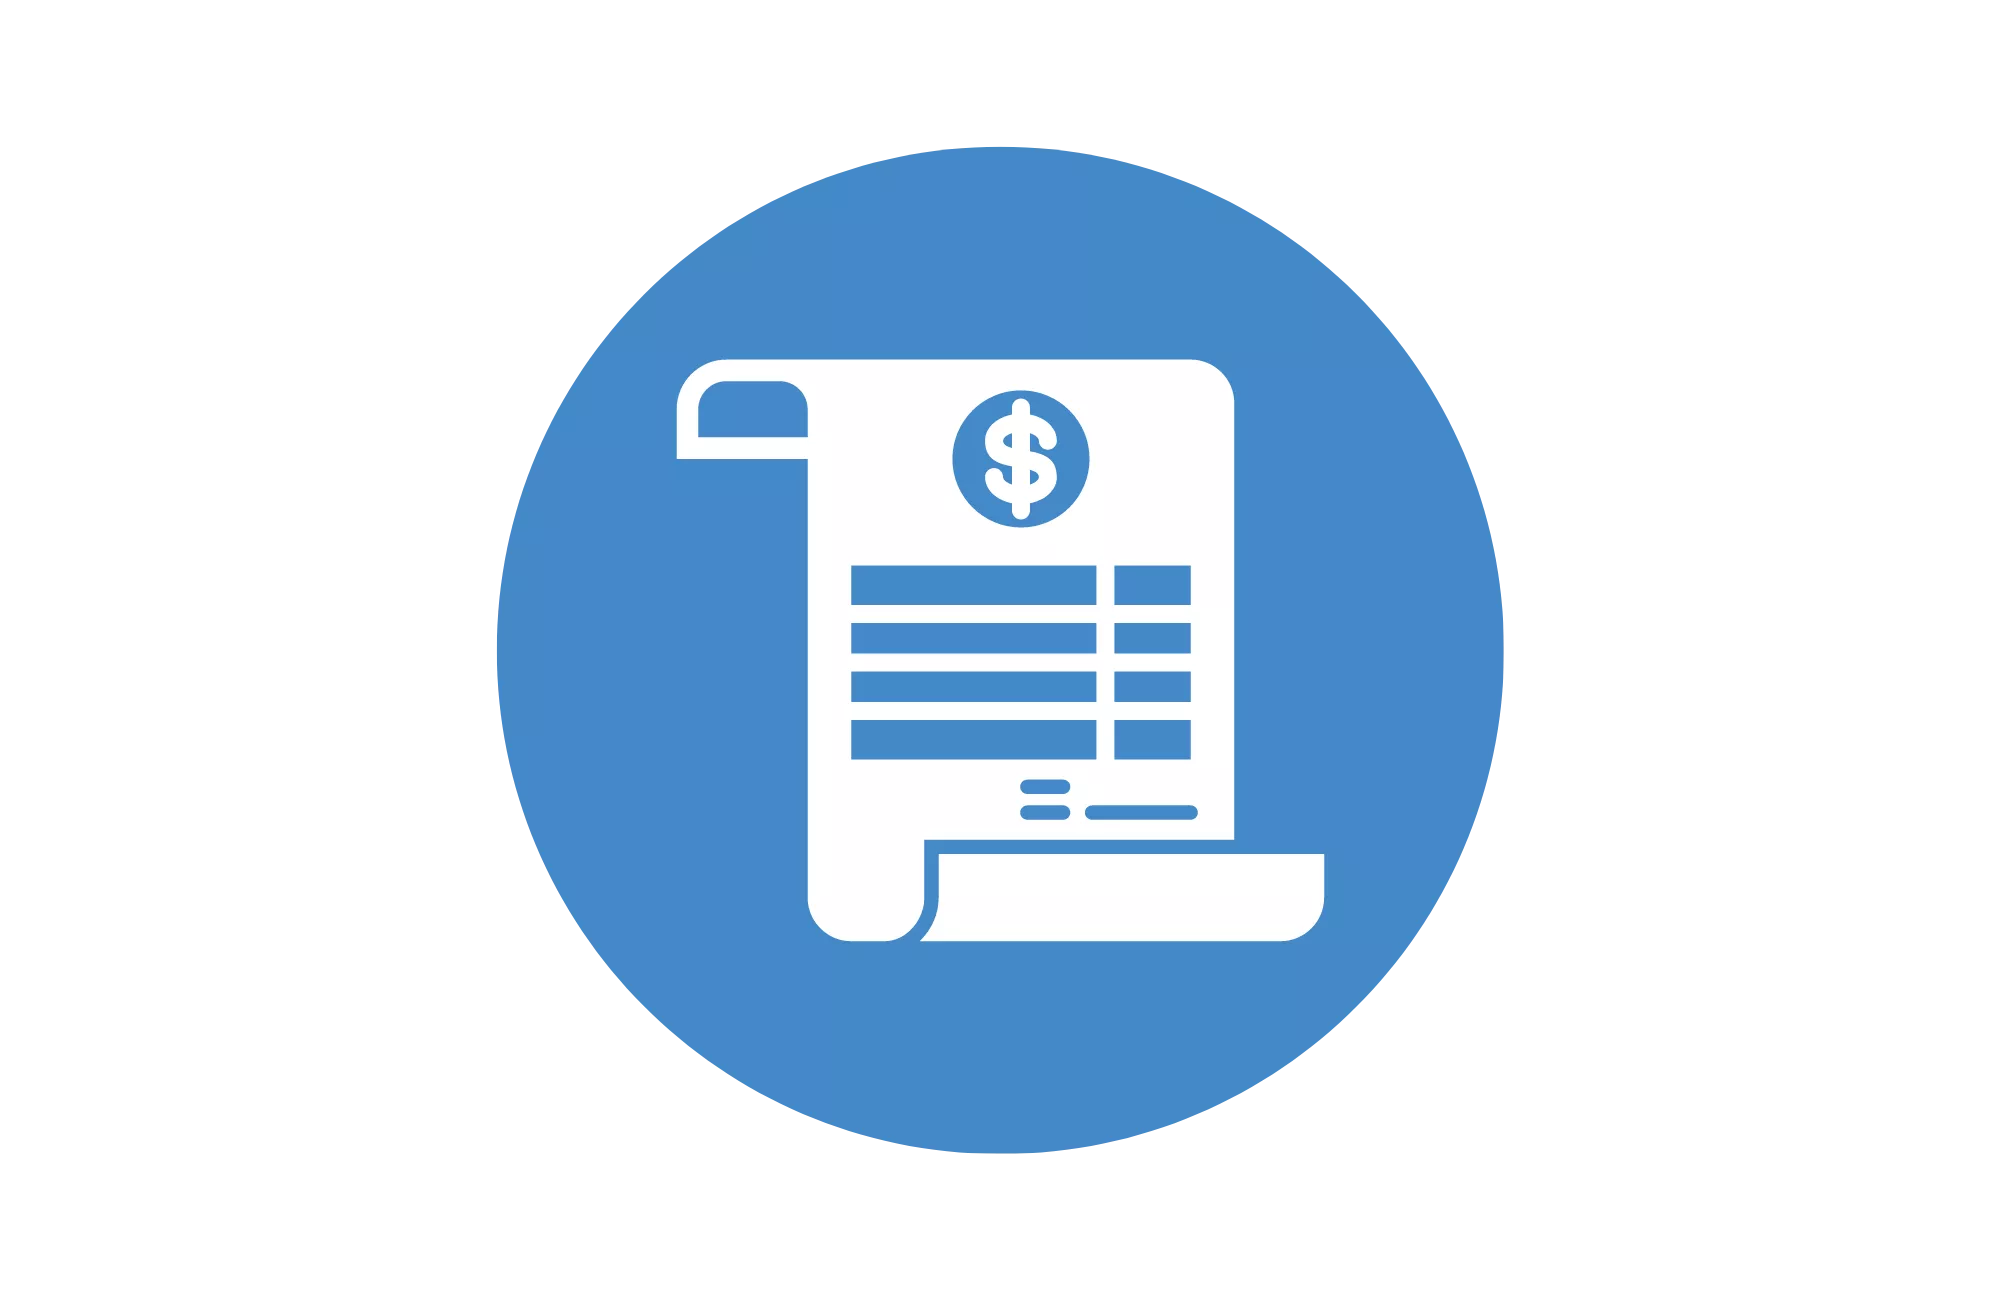 an e-invoicing document in a blue circle